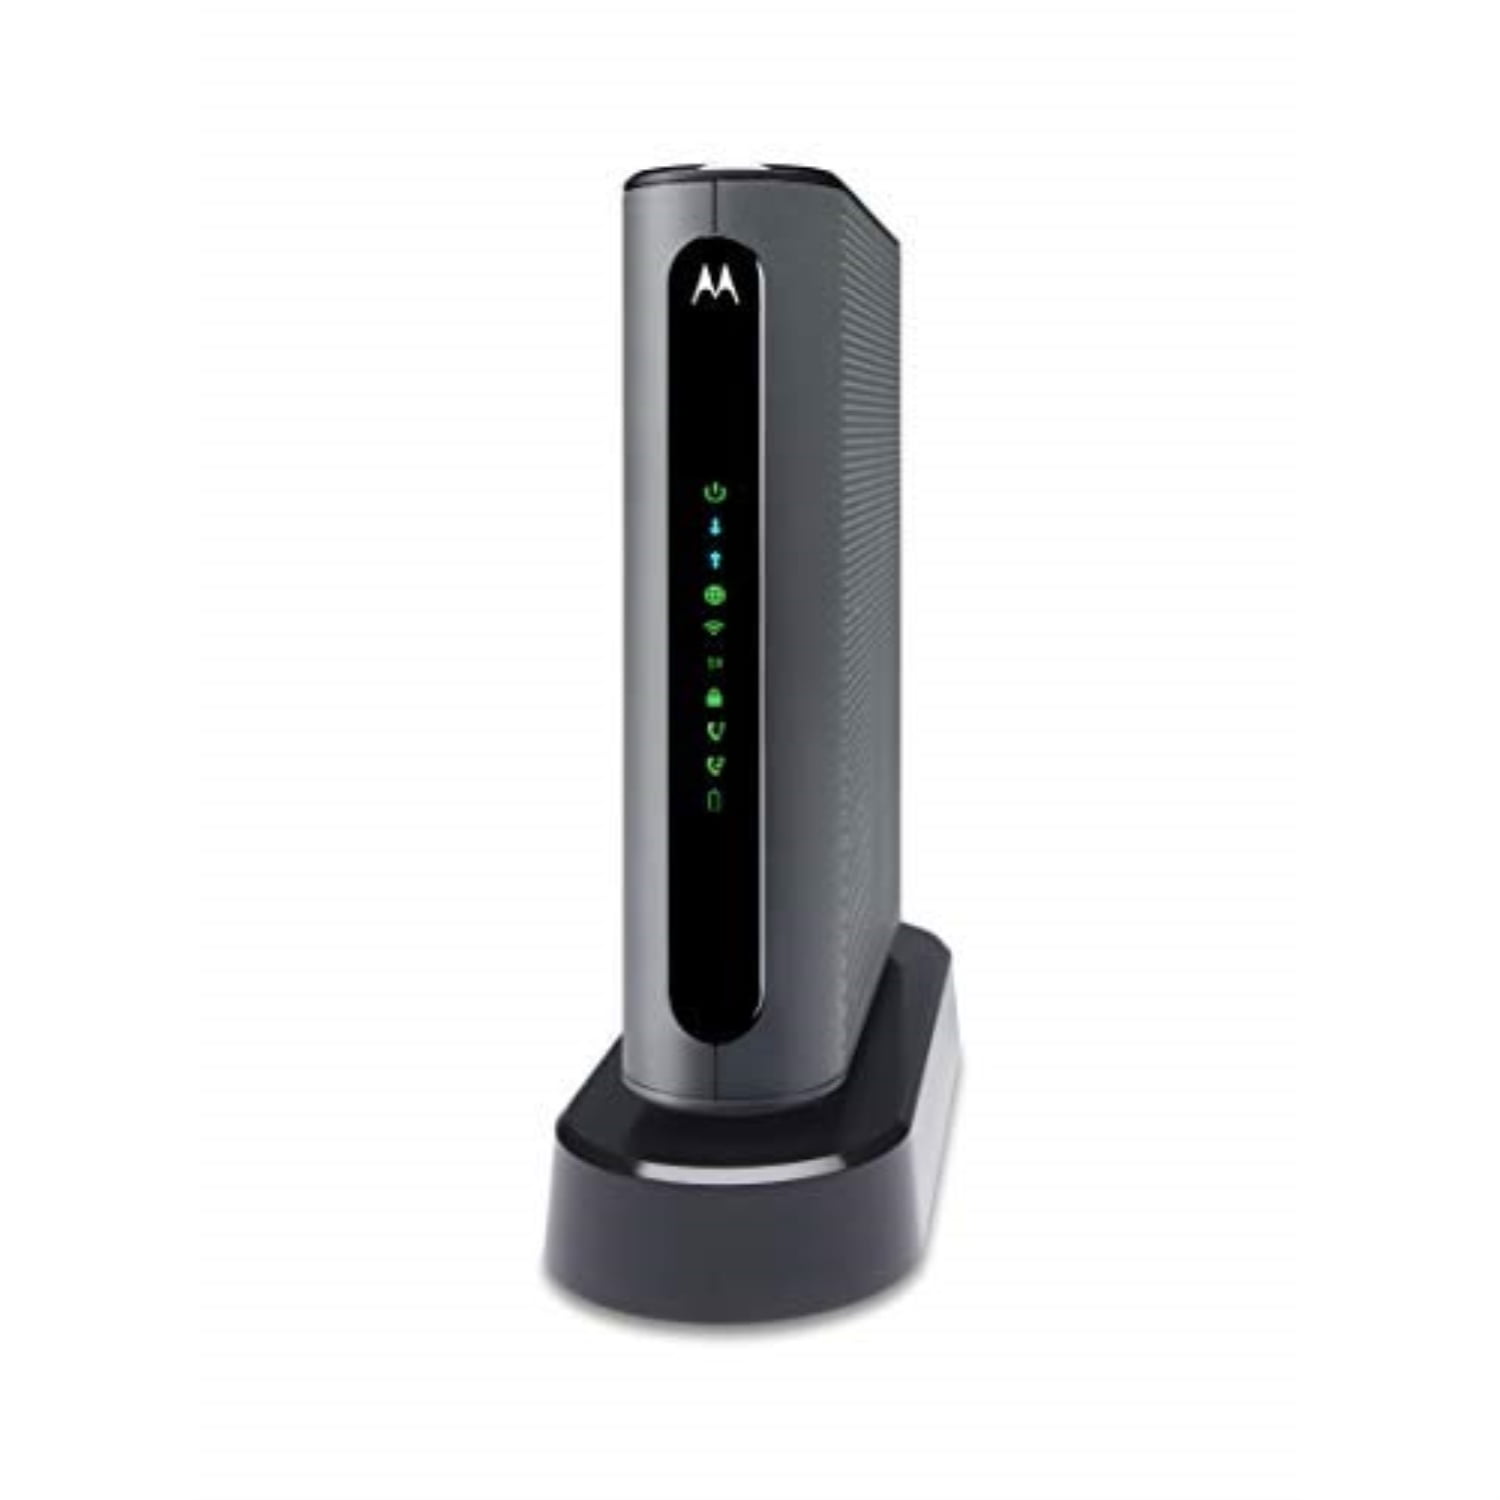 MOTOROLA MT7711 24X8 Cable Modem/Router with Two Phone Ports, DOCSIS 3.0 Modem, and AC1900 Dual